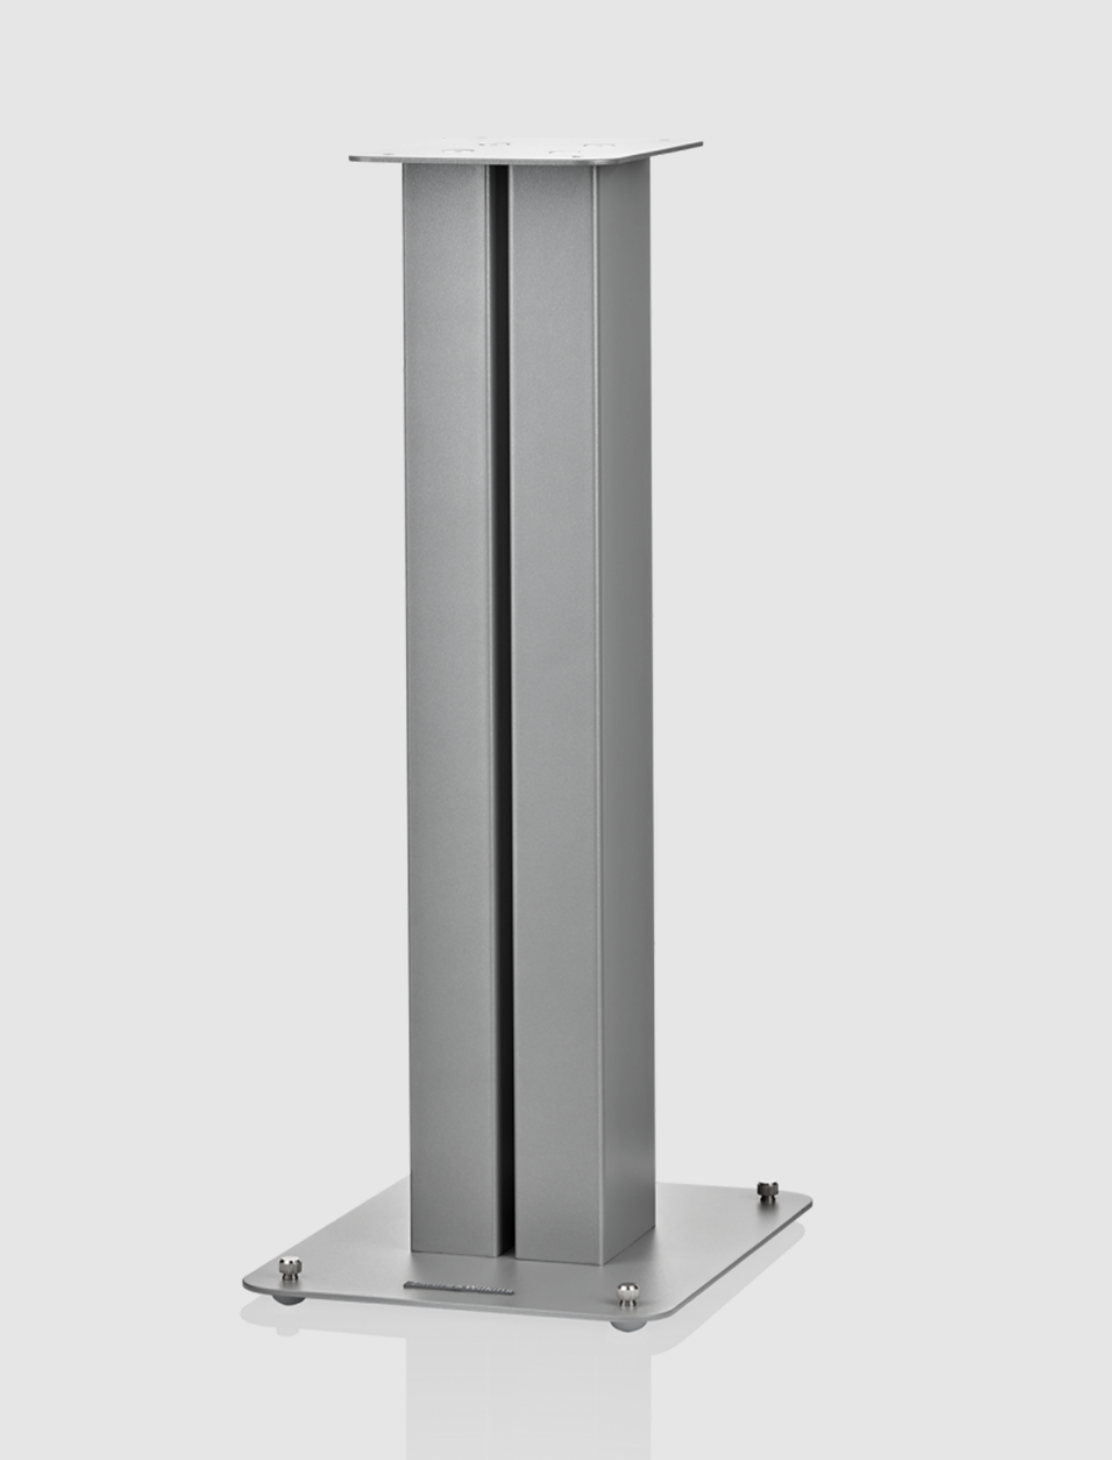 B&W FS600 S3 Speaker Stands in Silver. Angled image